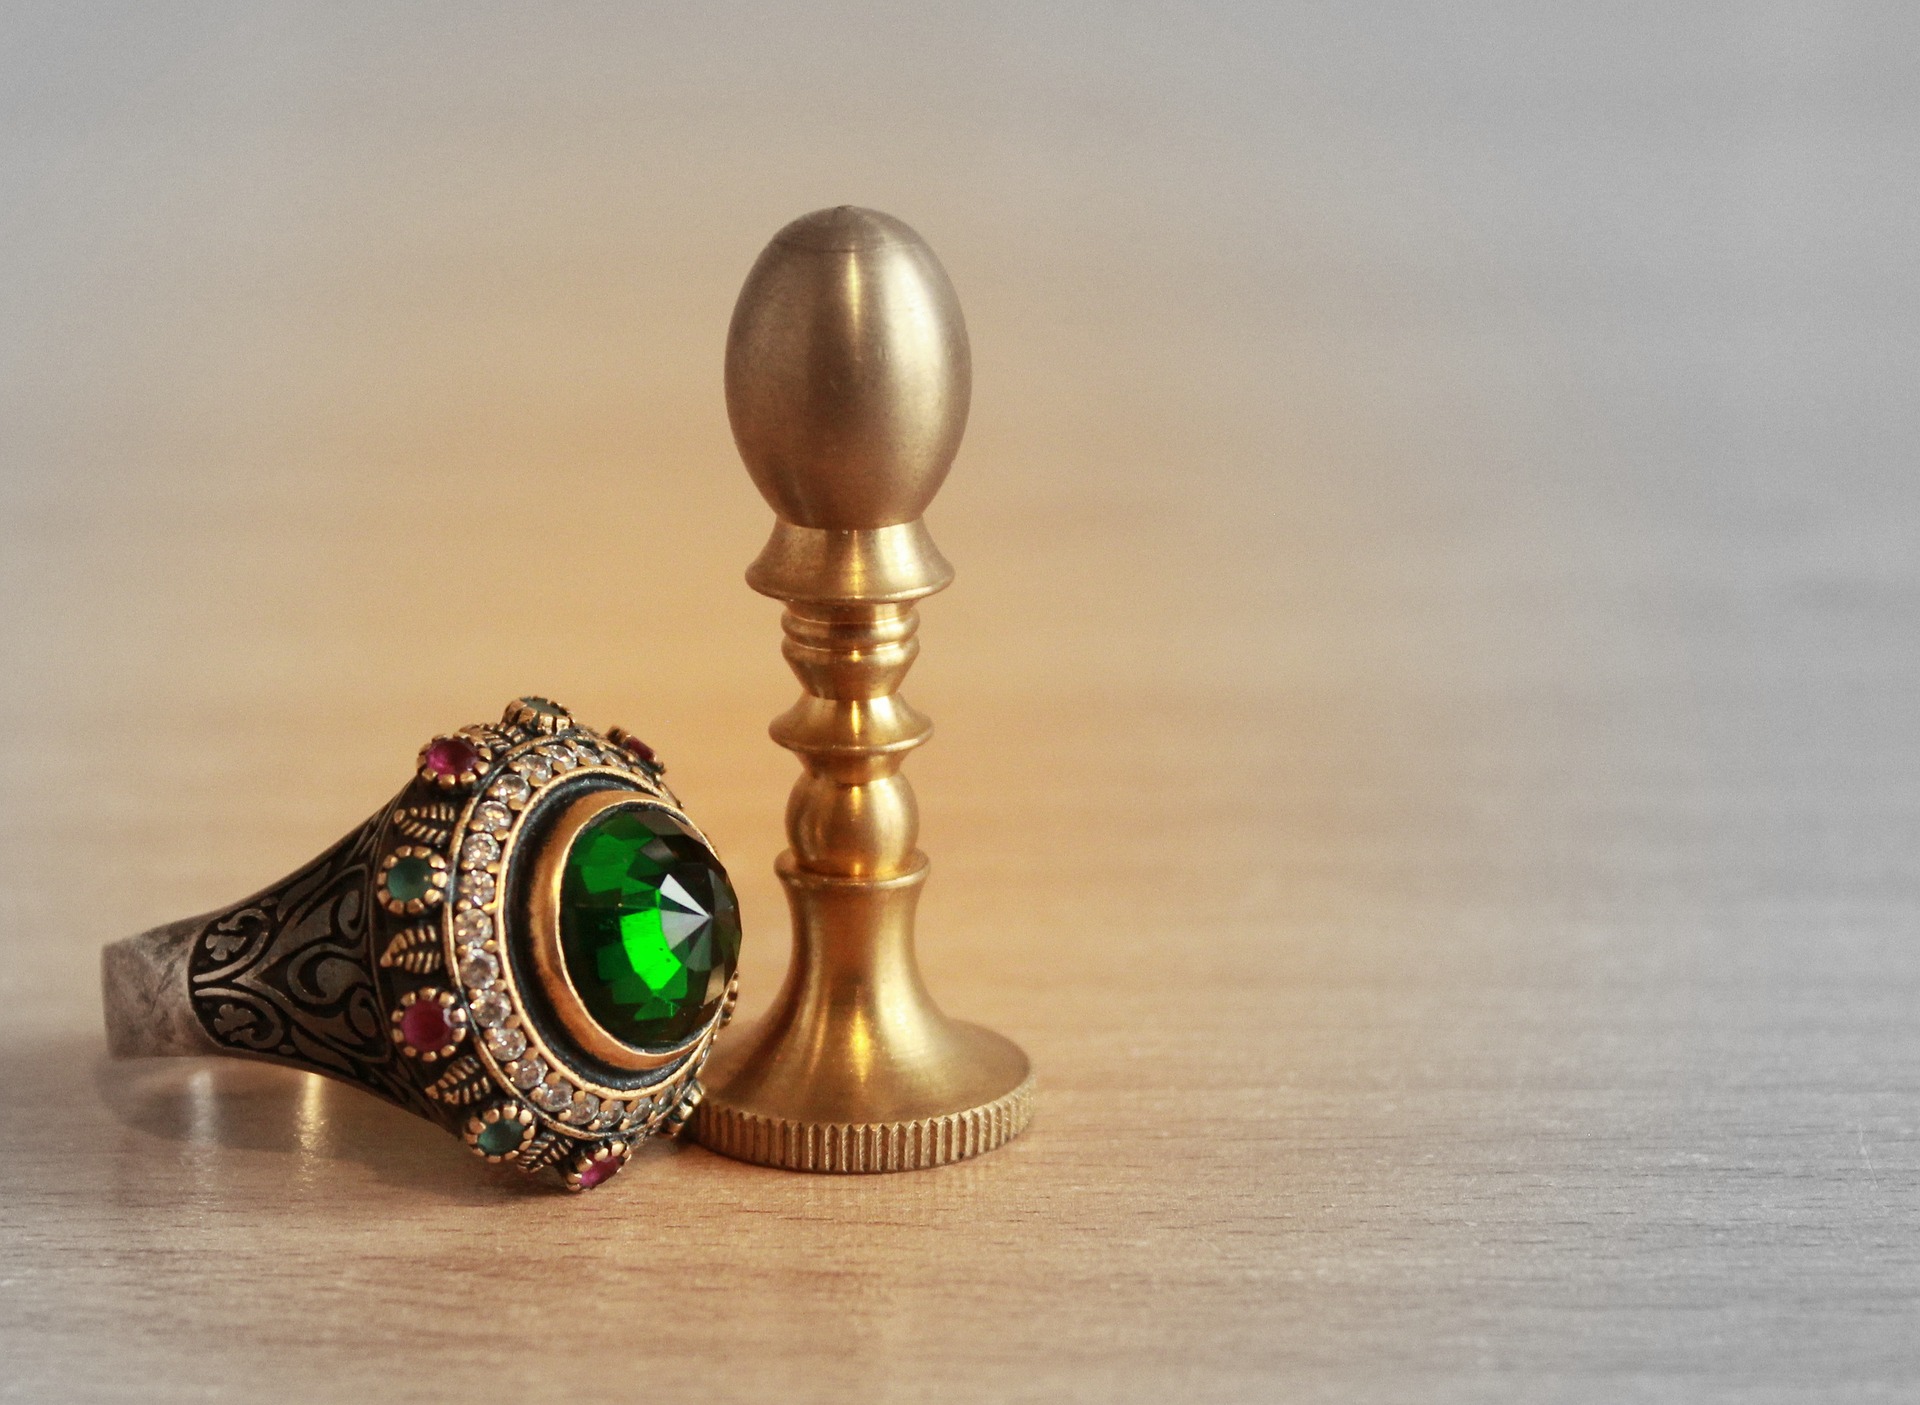 Ring of power with green gem and stamp